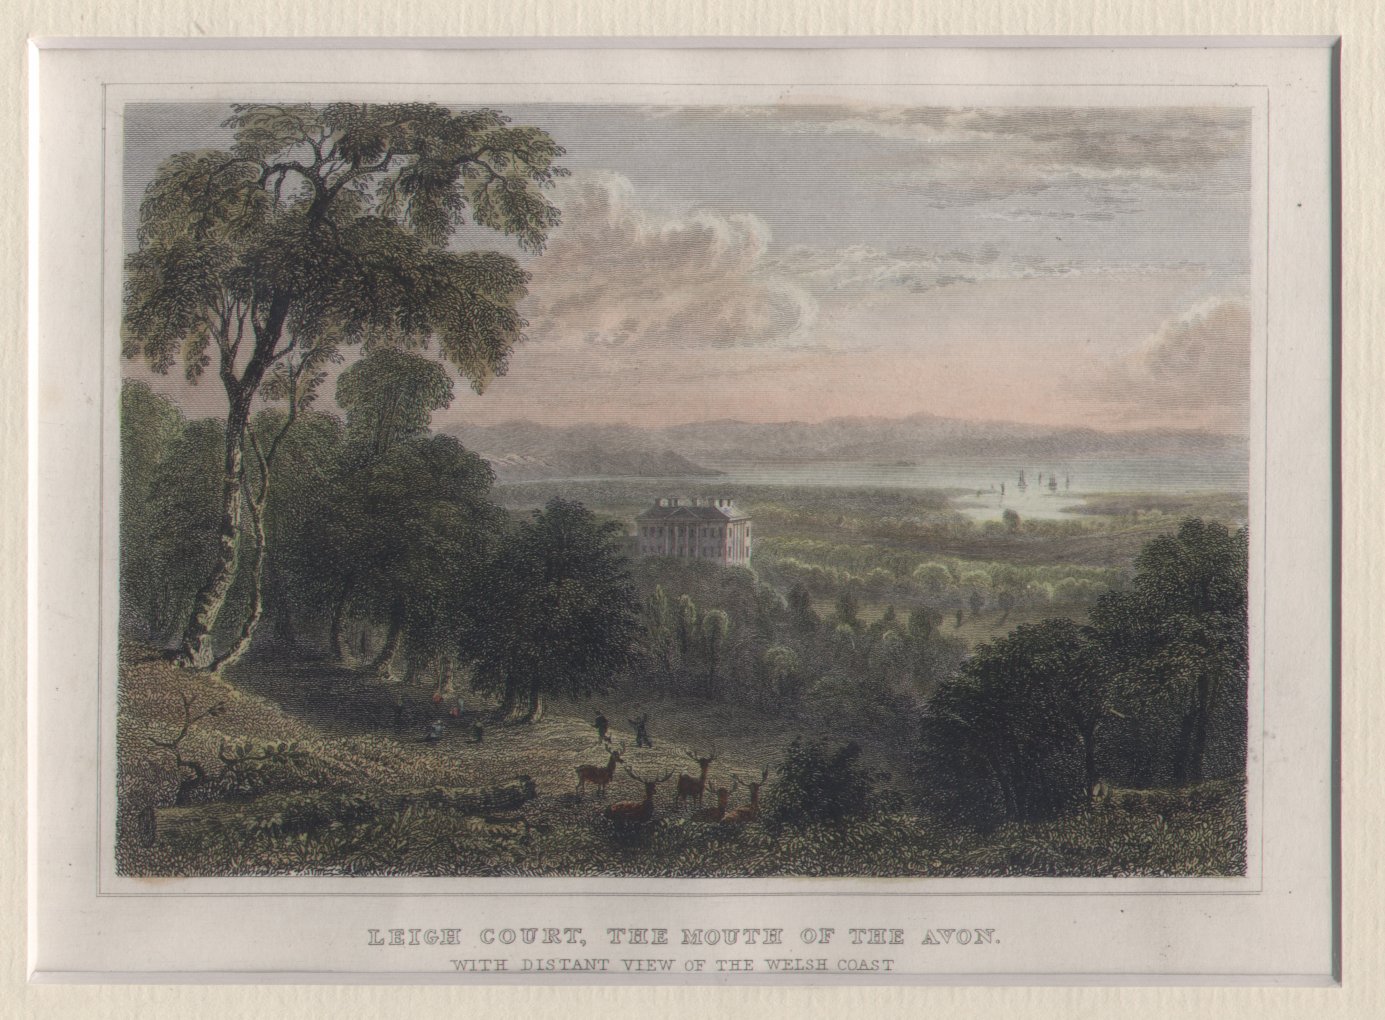 Print - Leigh Court, The Mouth of the Avon. With Distant view of the Welsh Coast